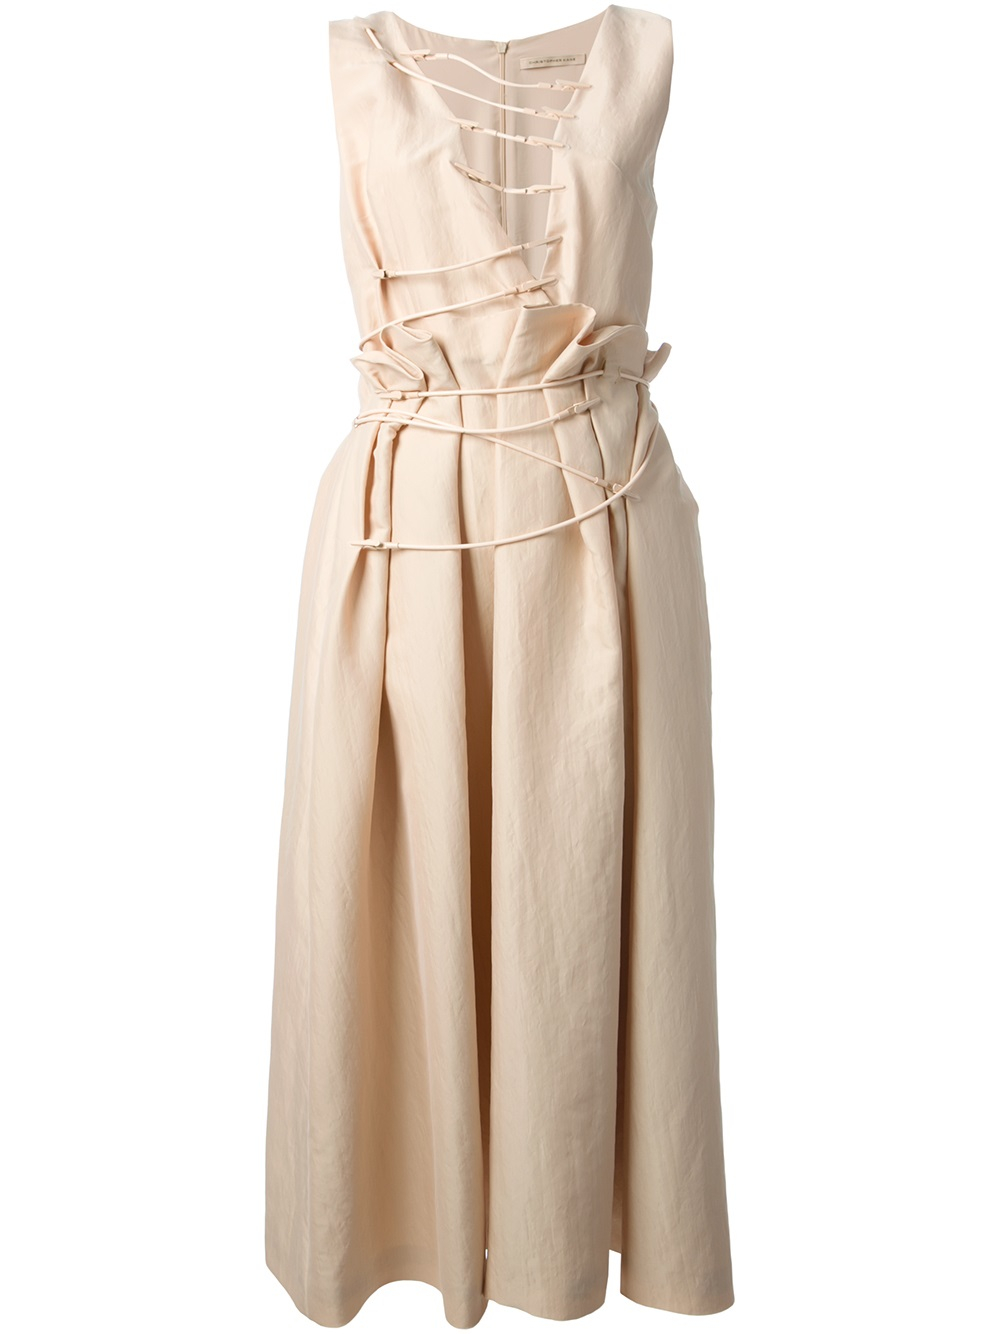 Lyst - Christopher Kane Strappy Dress in Natural